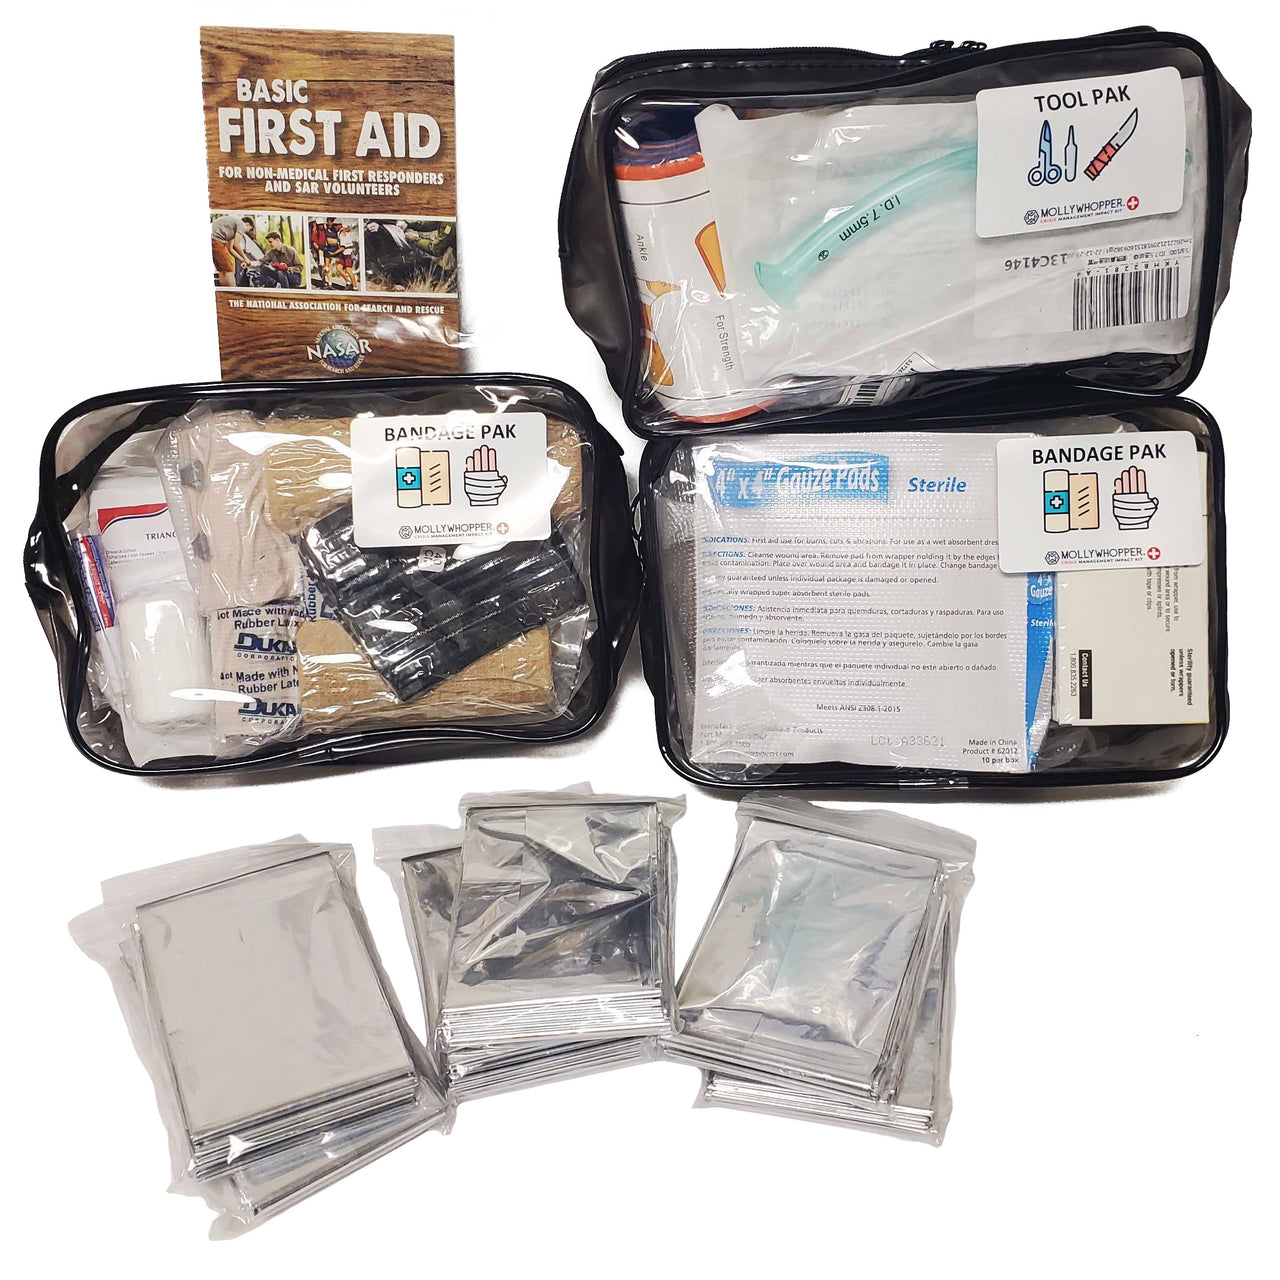 Premium Mollywhopper Crisis Management Kit, Ultimate First Aid Survival Trauma Backpack